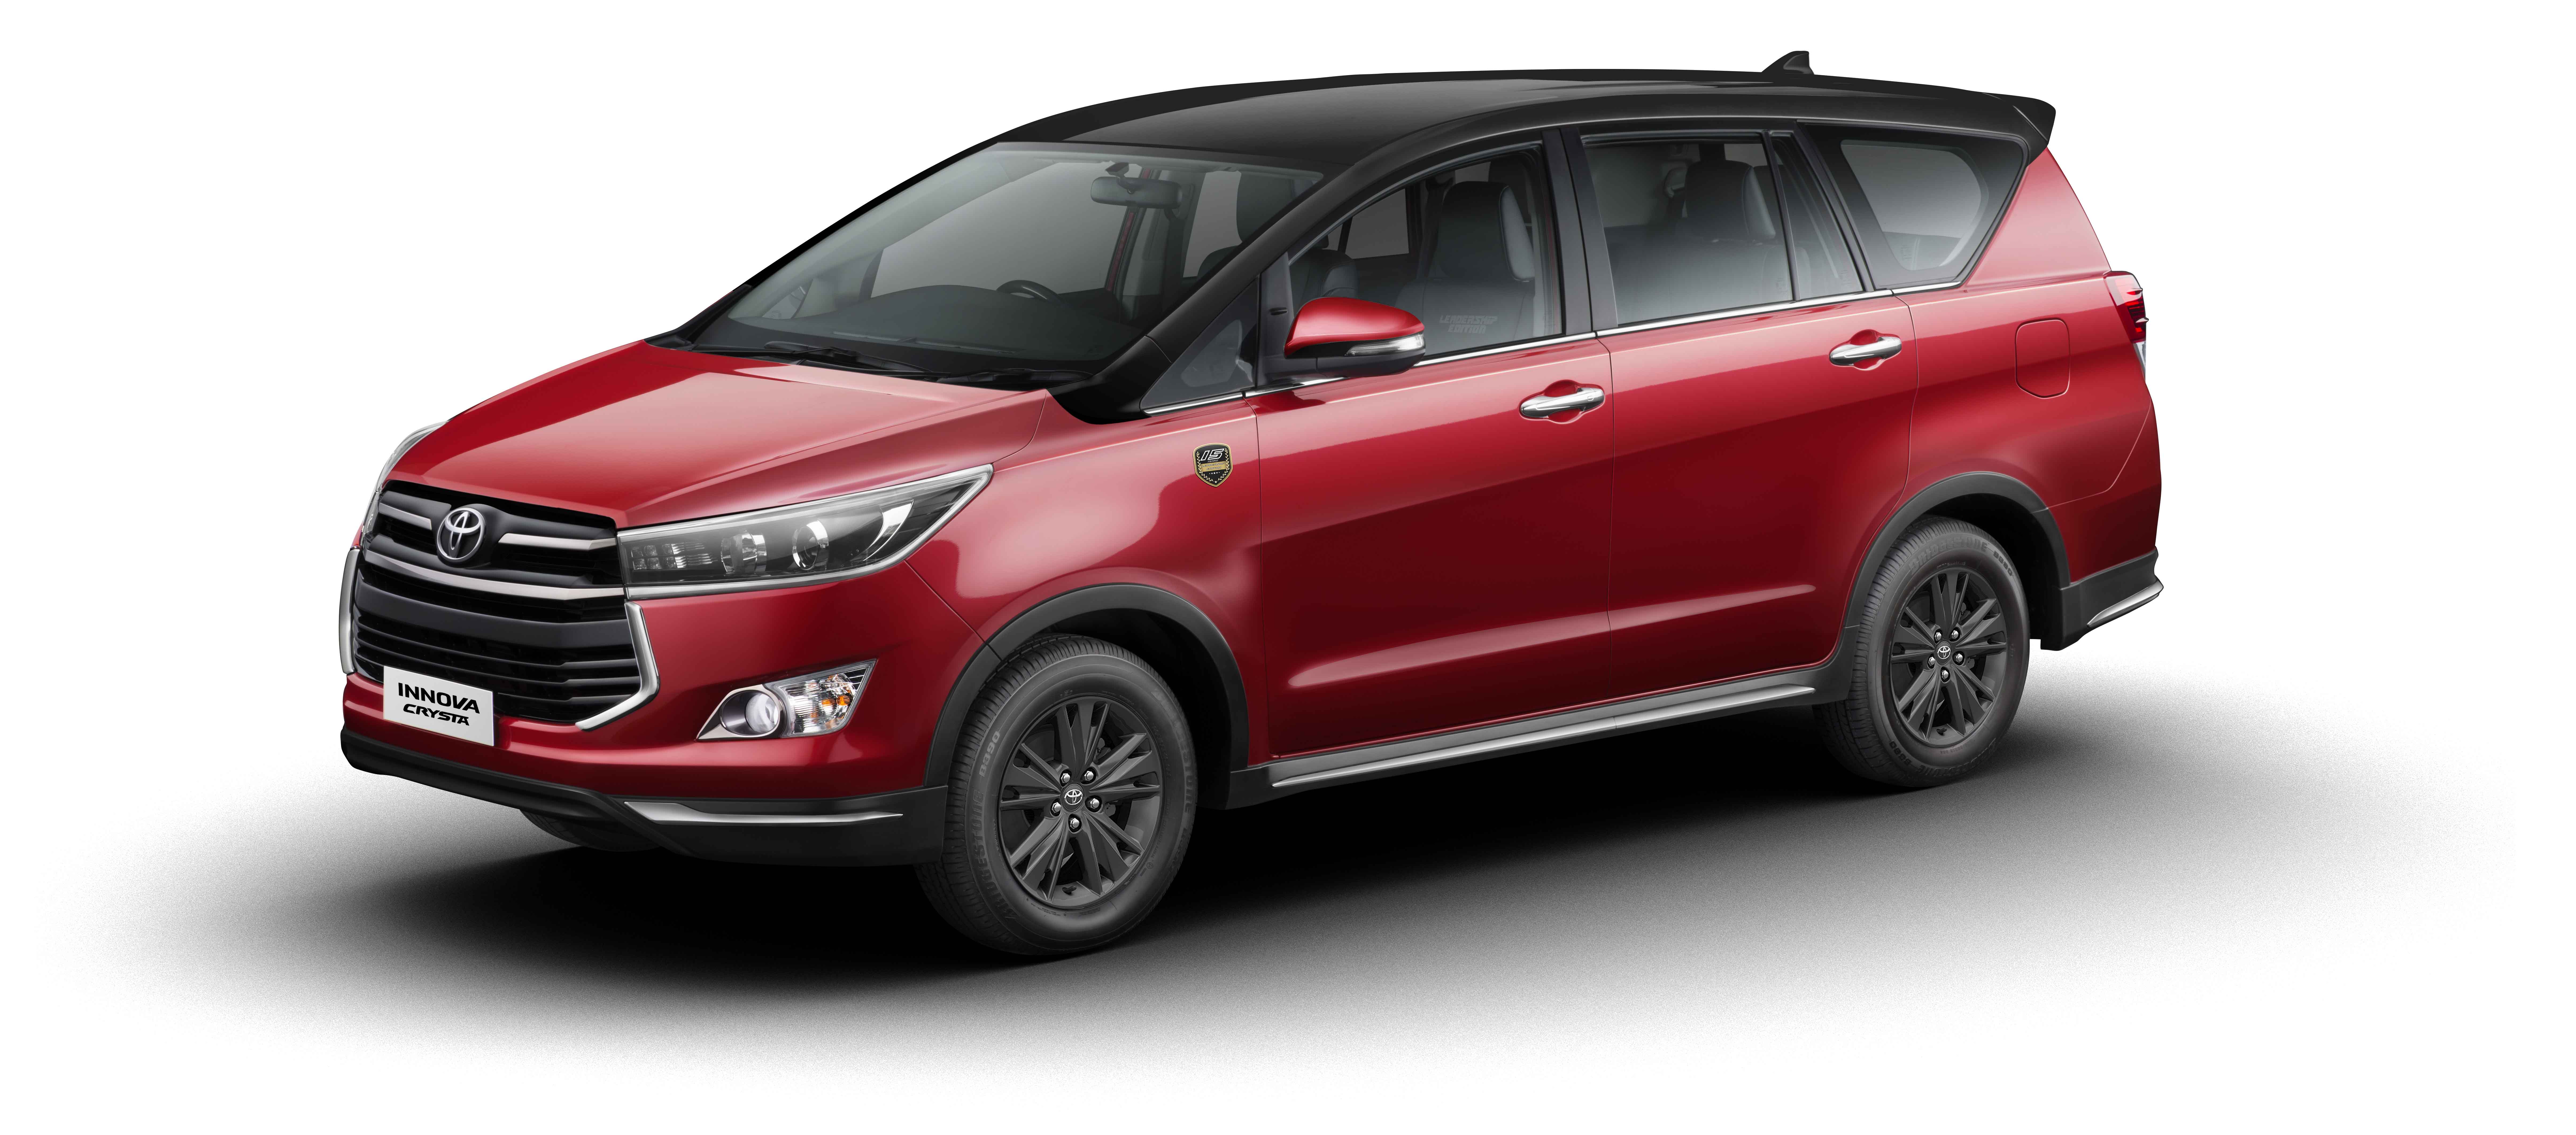 Toyota Innova Crysta Leadership Edition Launched At Inr 21 21 Lakh